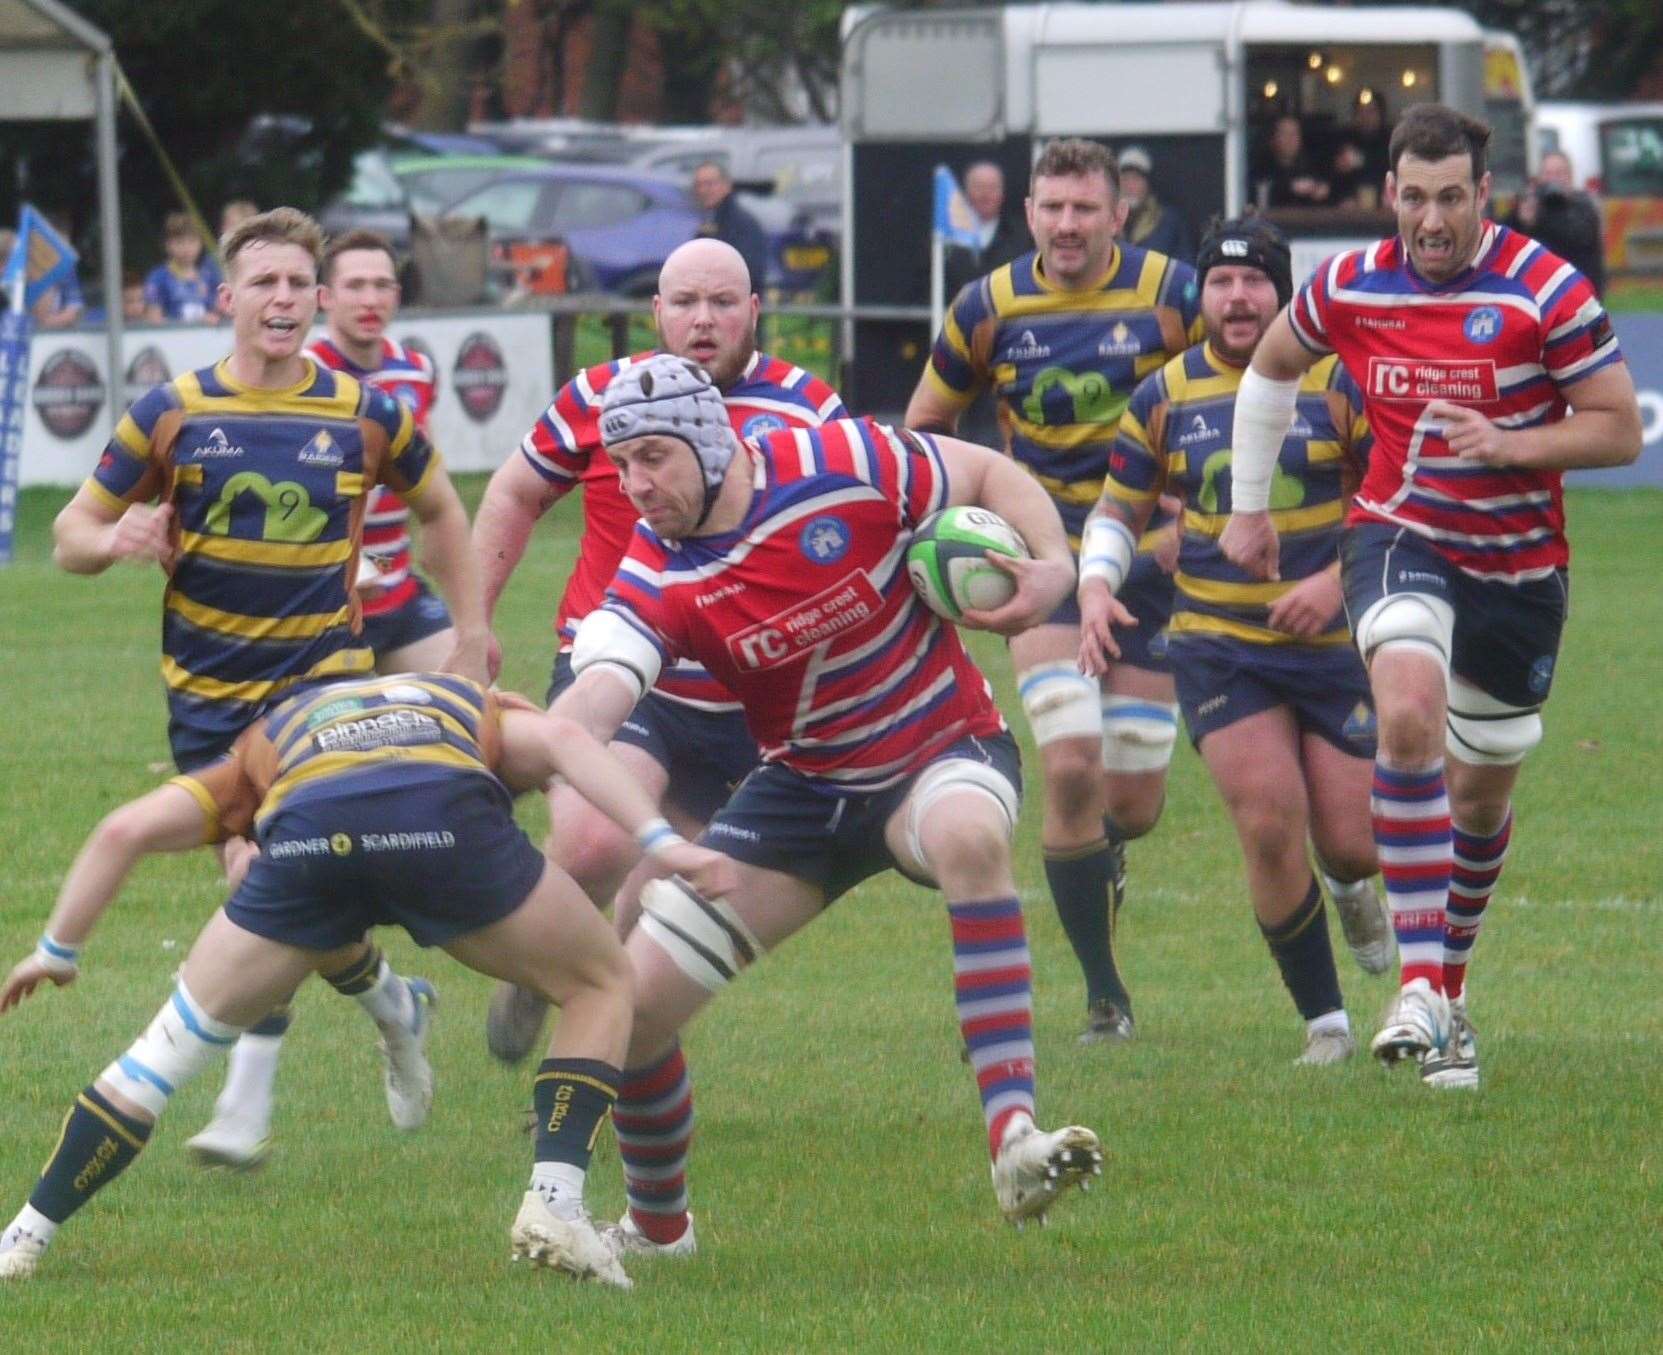 Tonbridge Juddians' Toby Freeman takes the game to Worthing. Picture: Adam Hookway